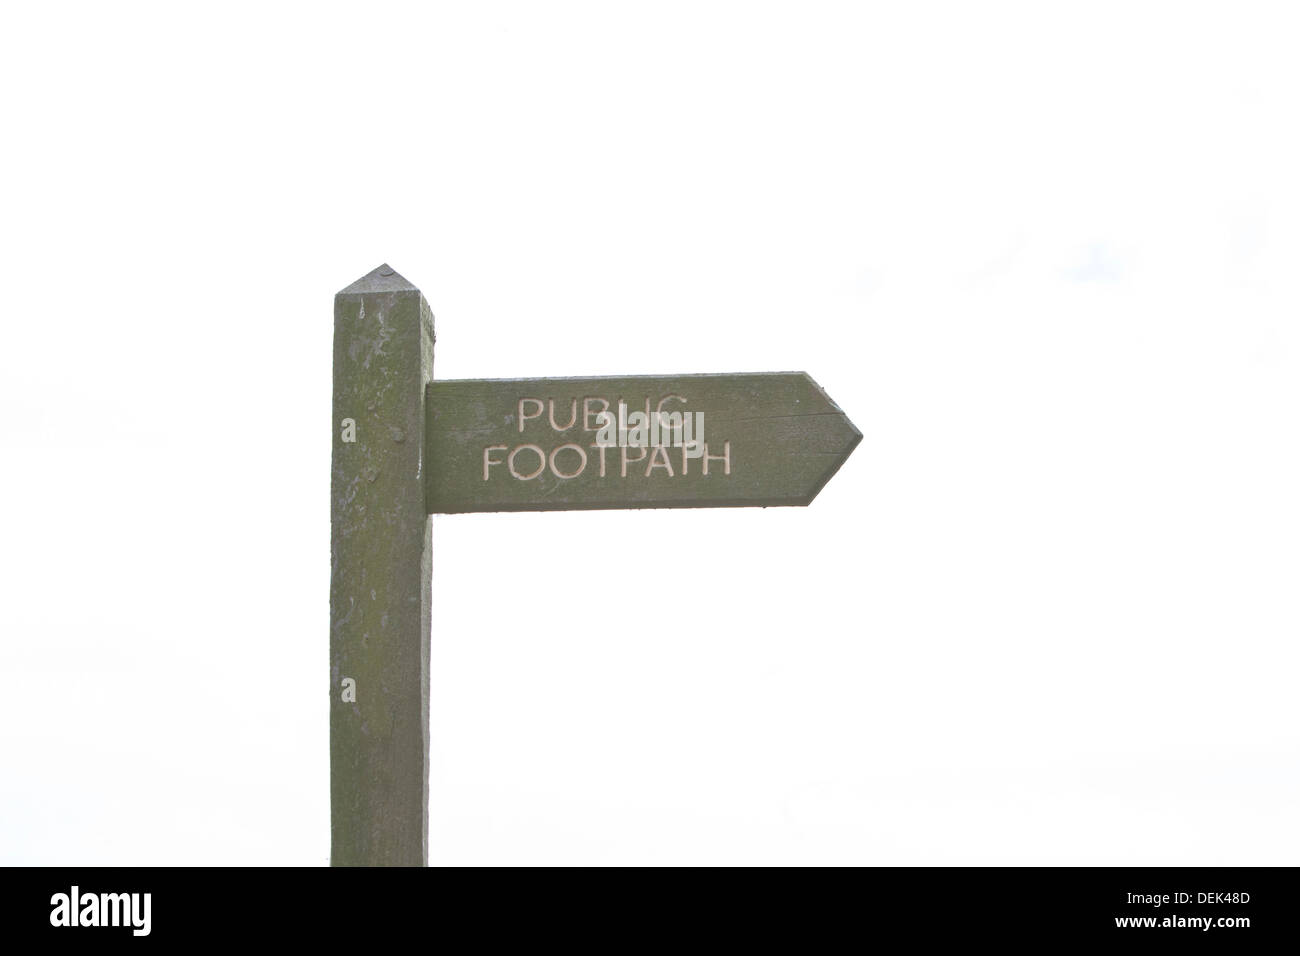 Public Footpath Sign Stock Photo